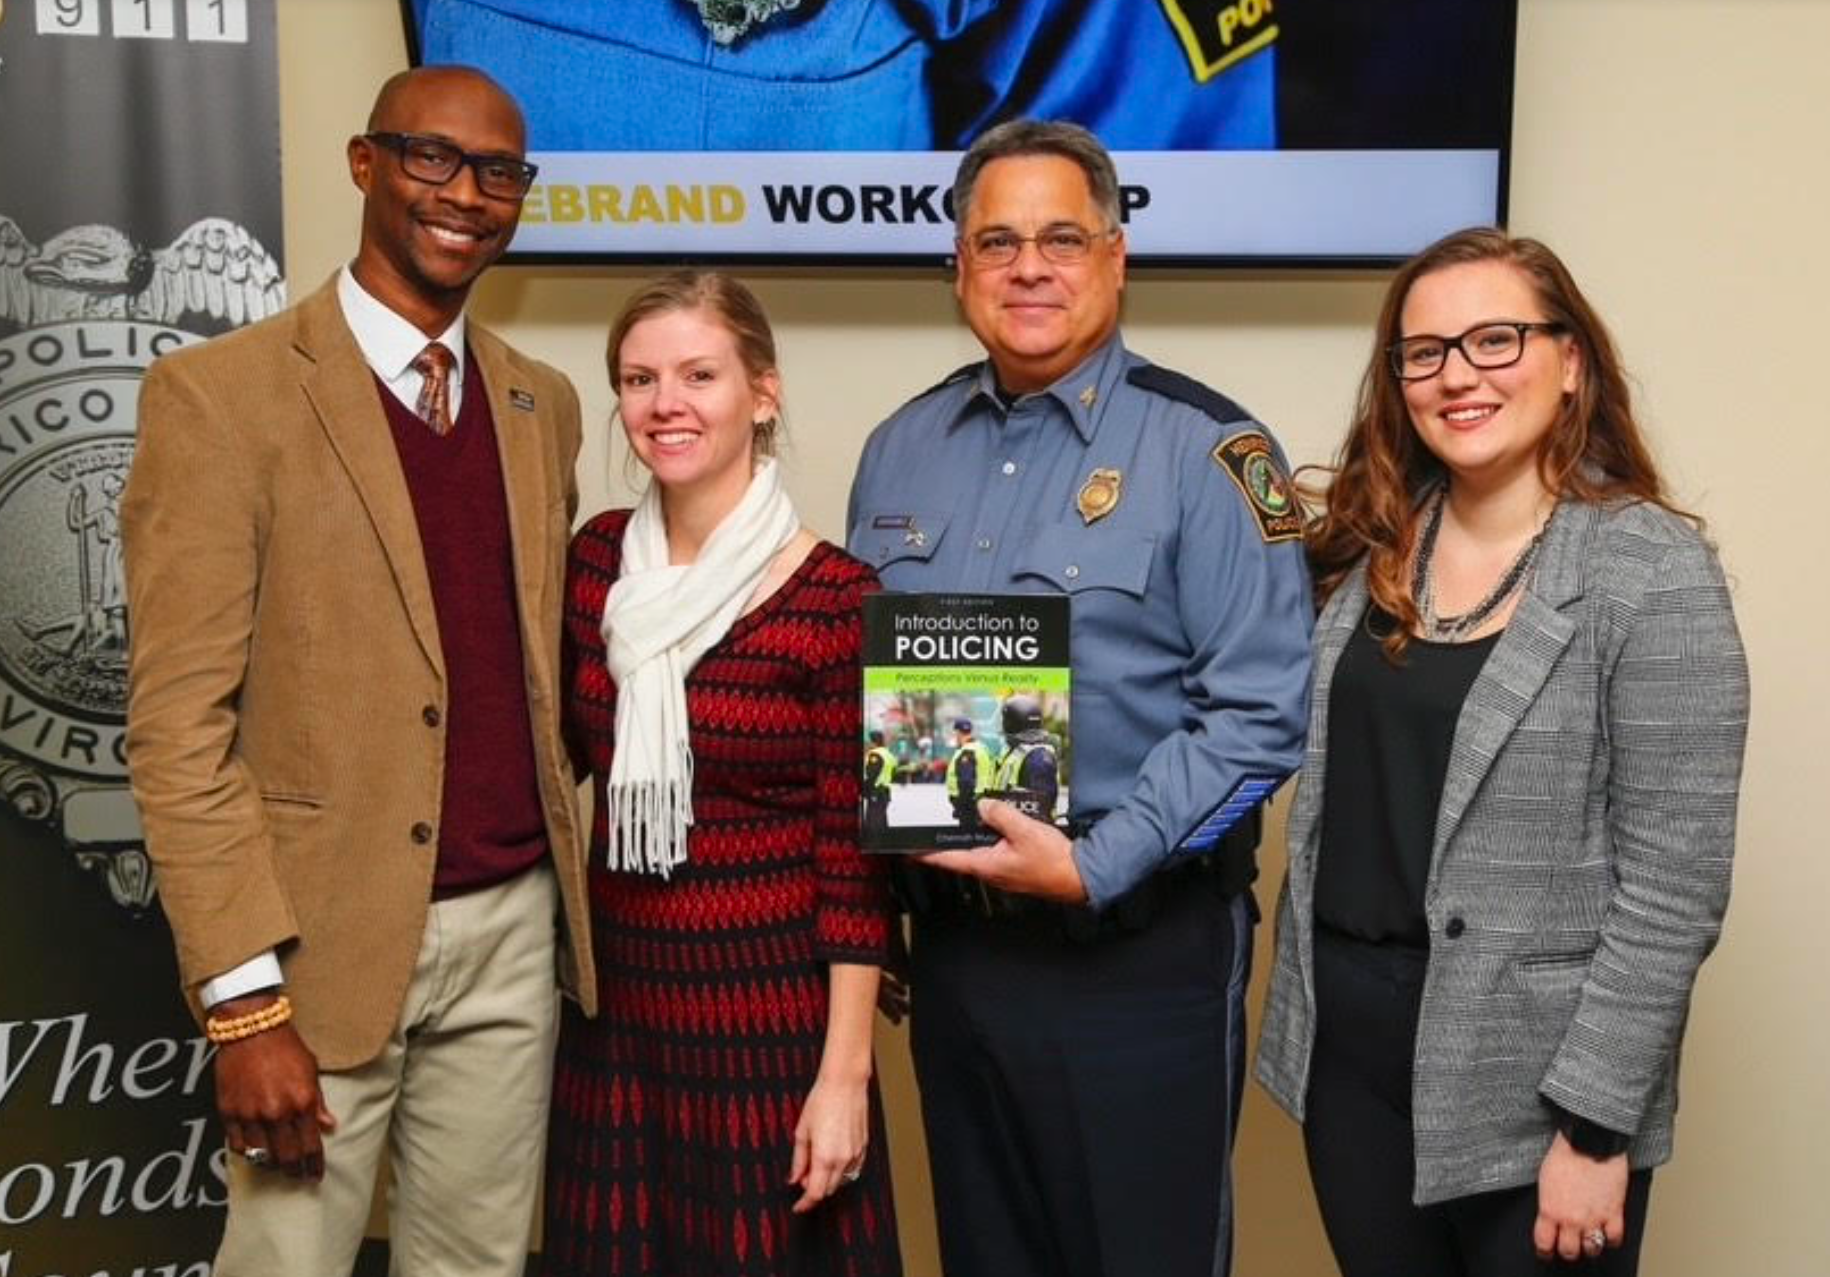 Amy Clifton-Mills (far right) created the premade quizzes that were included in Chernoh Wurie's textbook “Introduction to Policing.” Together with Wurie’s wife Jennifer, they presented the book to then Henrico Police Chief Humberto Cardounel Jr.